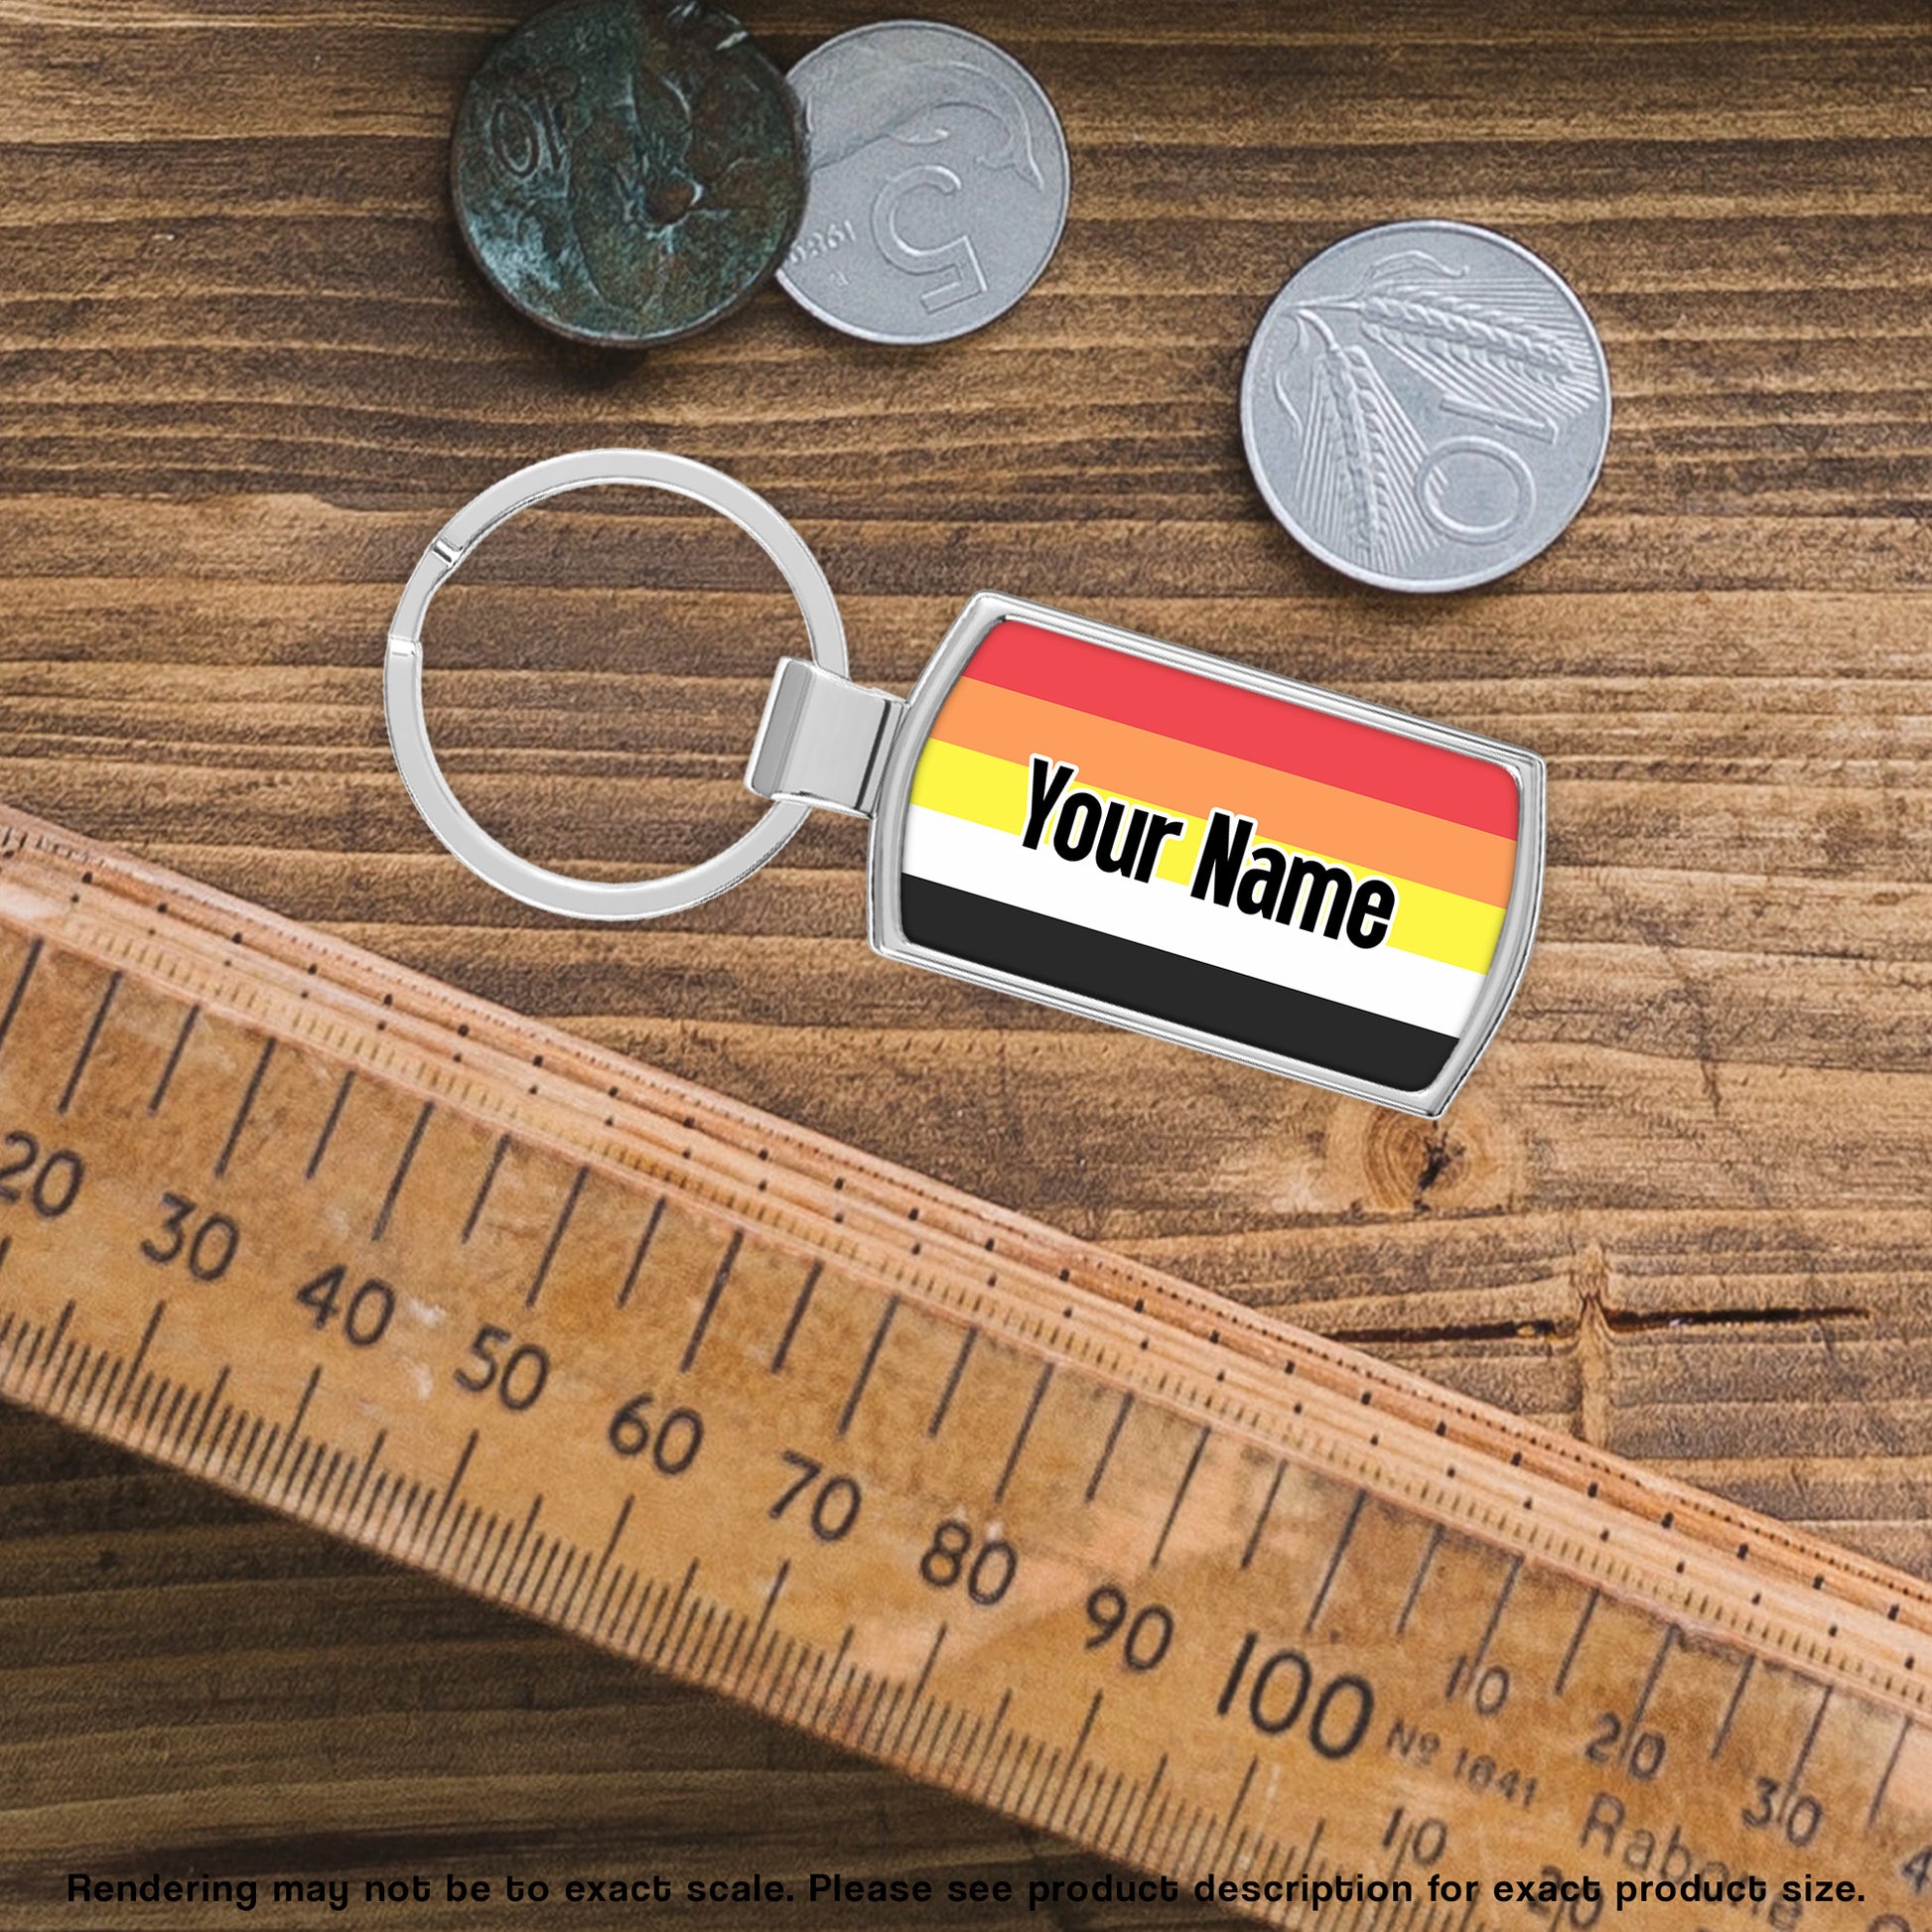 Lithromantic pride flag metal keyring personalised with your name